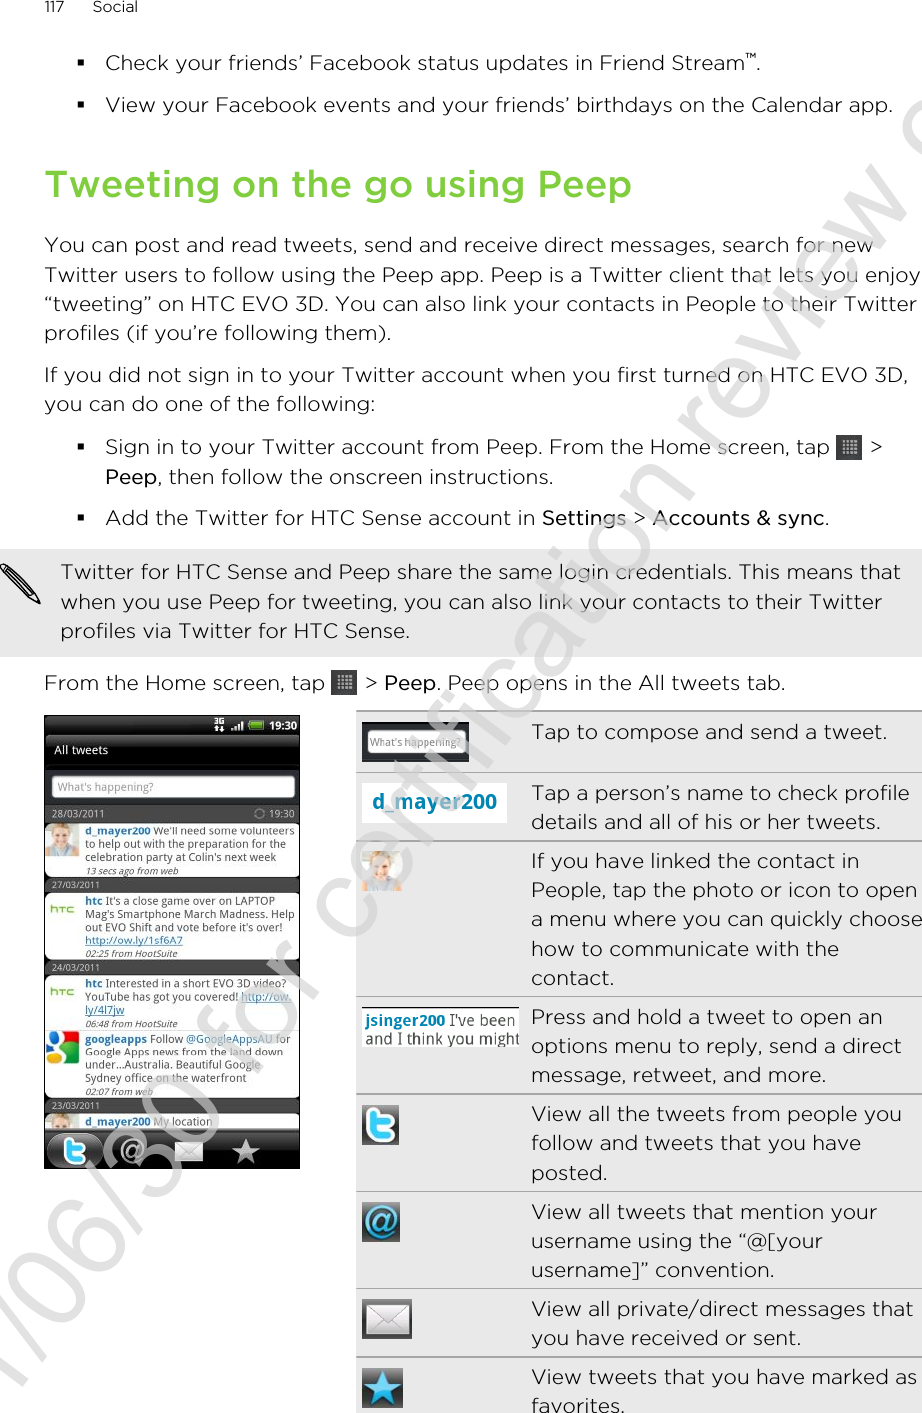 §Check your friends’ Facebook status updates in Friend Stream™.§View your Facebook events and your friends’ birthdays on the Calendar app.Tweeting on the go using PeepYou can post and read tweets, send and receive direct messages, search for newTwitter users to follow using the Peep app. Peep is a Twitter client that lets you enjoy“tweeting” on HTC EVO 3D. You can also link your contacts in People to their Twitterprofiles (if you’re following them).If you did not sign in to your Twitter account when you first turned on HTC EVO 3D,you can do one of the following:§Sign in to your Twitter account from Peep. From the Home screen, tap   &gt;Peep, then follow the onscreen instructions.§Add the Twitter for HTC Sense account in Settings &gt; Accounts &amp; sync.Twitter for HTC Sense and Peep share the same login credentials. This means thatwhen you use Peep for tweeting, you can also link your contacts to their Twitterprofiles via Twitter for HTC Sense.From the Home screen, tap   &gt; Peep. Peep opens in the All tweets tab.Tap to compose and send a tweet.Tap a person’s name to check profiledetails and all of his or her tweets.If you have linked the contact inPeople, tap the photo or icon to opena menu where you can quickly choosehow to communicate with thecontact.Press and hold a tweet to open anoptions menu to reply, send a directmessage, retweet, and more.View all the tweets from people youfollow and tweets that you haveposted.View all tweets that mention yourusername using the “@[yourusername]” convention.View all private/direct messages thatyou have received or sent.View tweets that you have marked asfavorites.117 Social2011/06/30 for certification review only